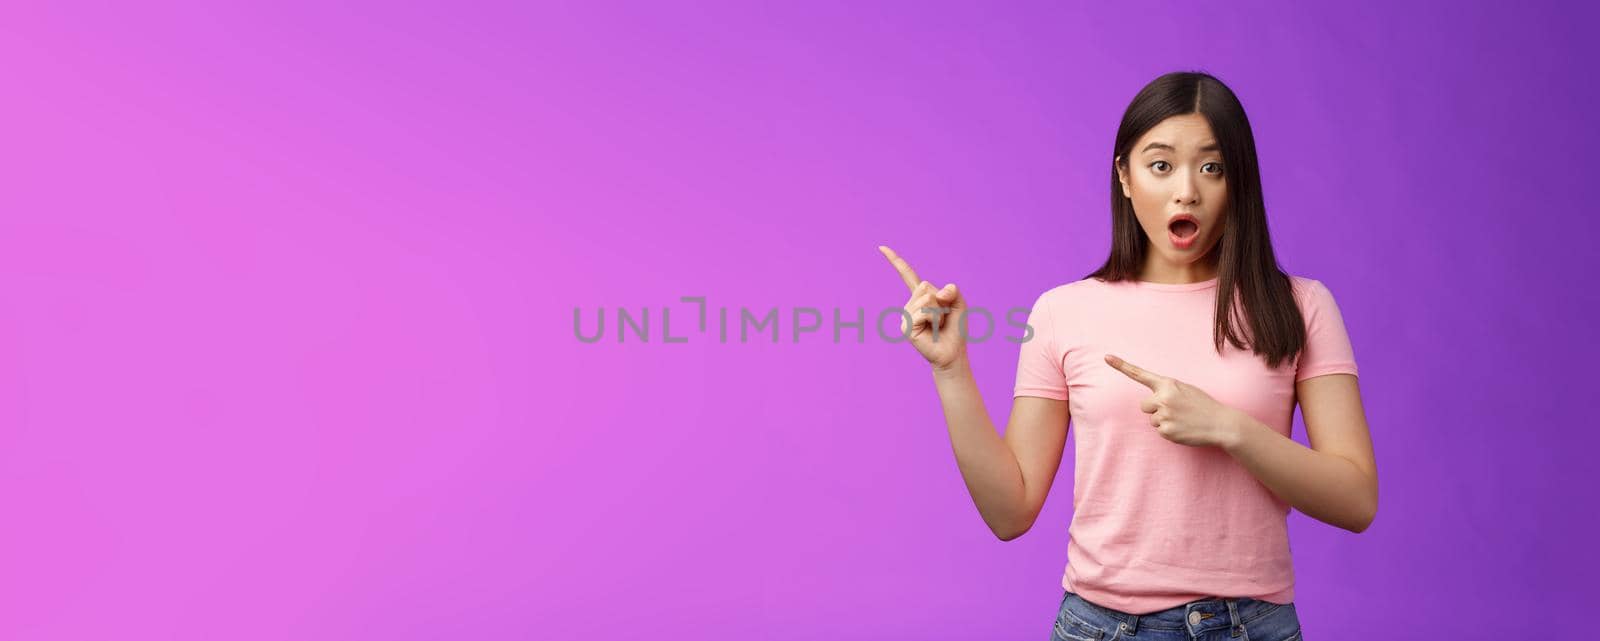 Shocked upset speechless cute asian girl react stunned friend got expensive car, drop jaw astonished, look camera full disbelief, pointing left, discuss astonishing news, stand purple background.